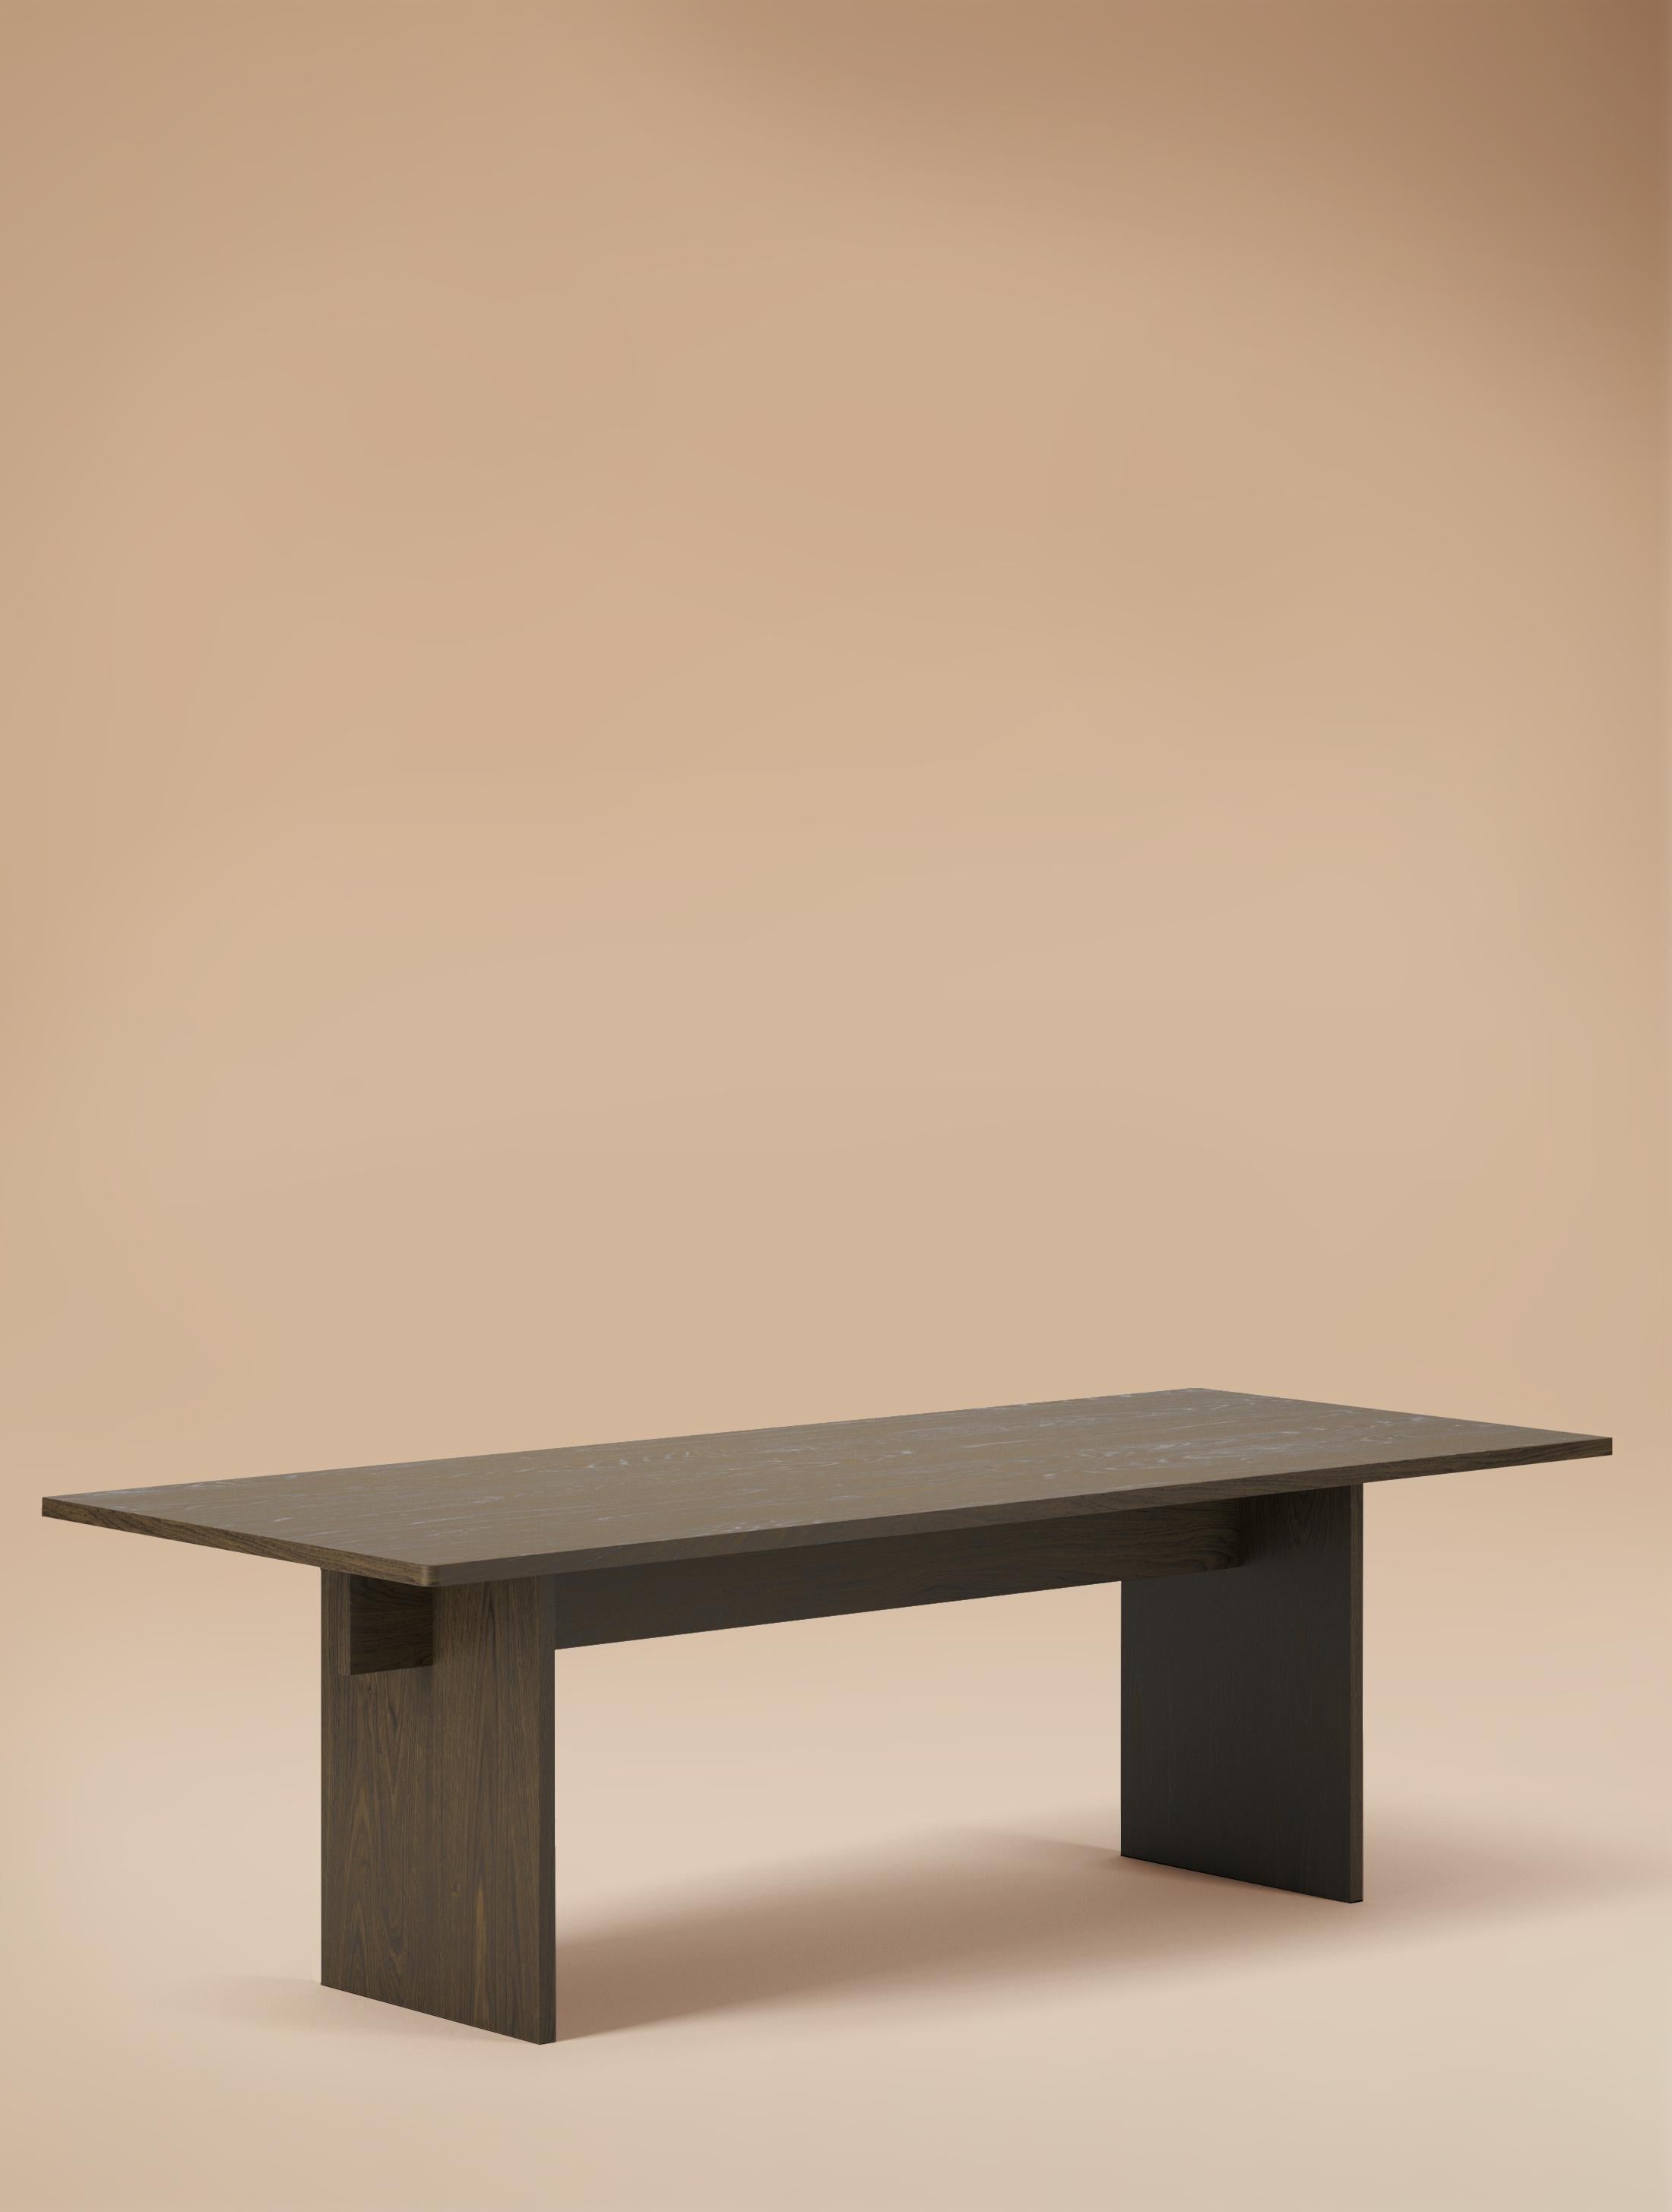 8 Seater  Faure Table Handcrafted in Walnut by Kevin Frankental for Lemon  12